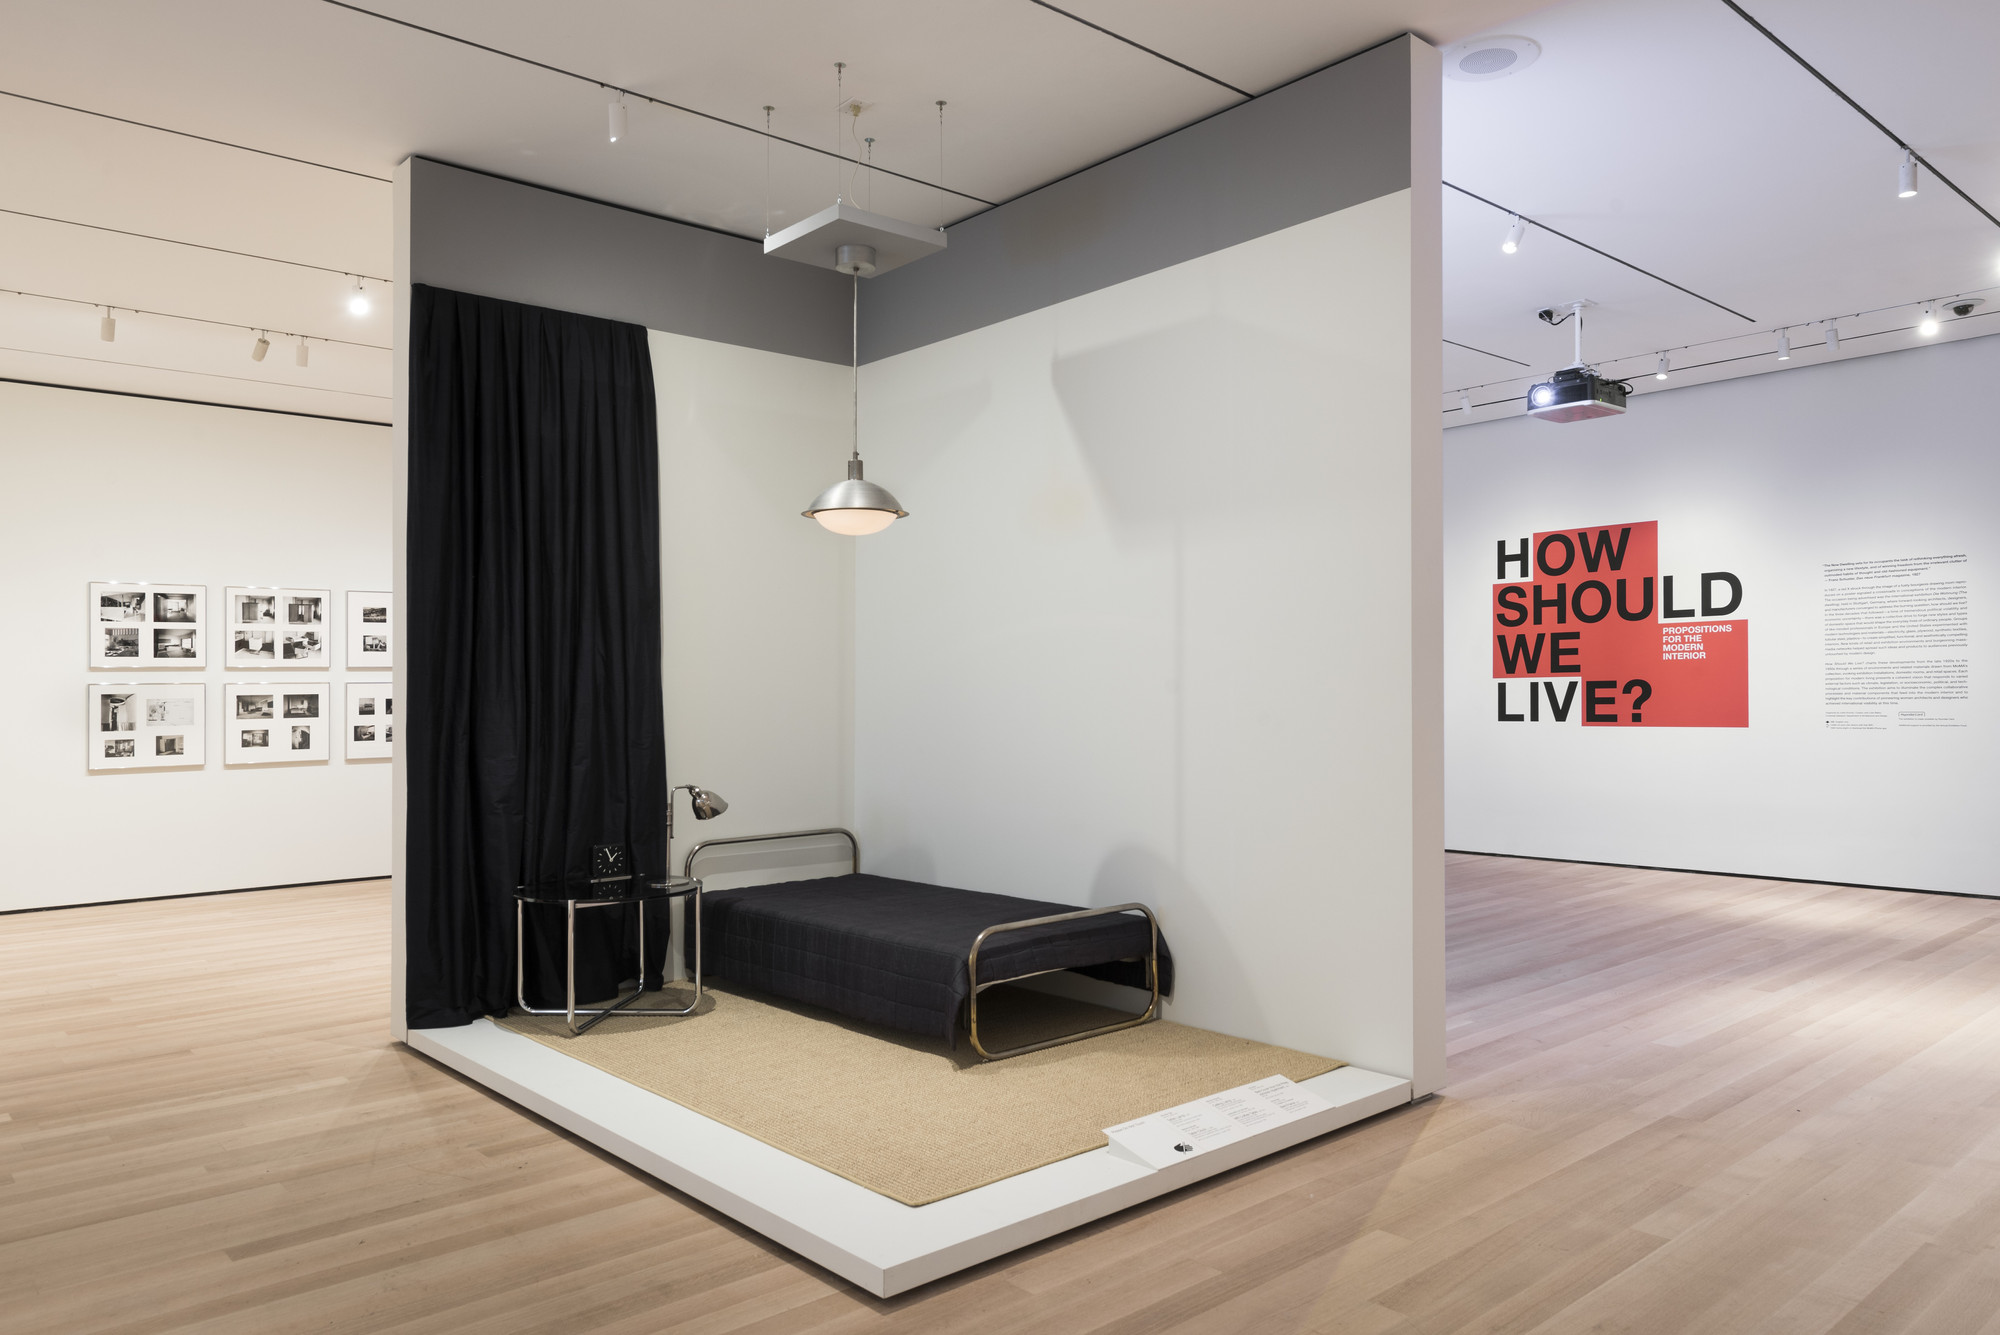 Installation view of the exhibition, "How Should We Propositions the Modern Interior" | MoMA